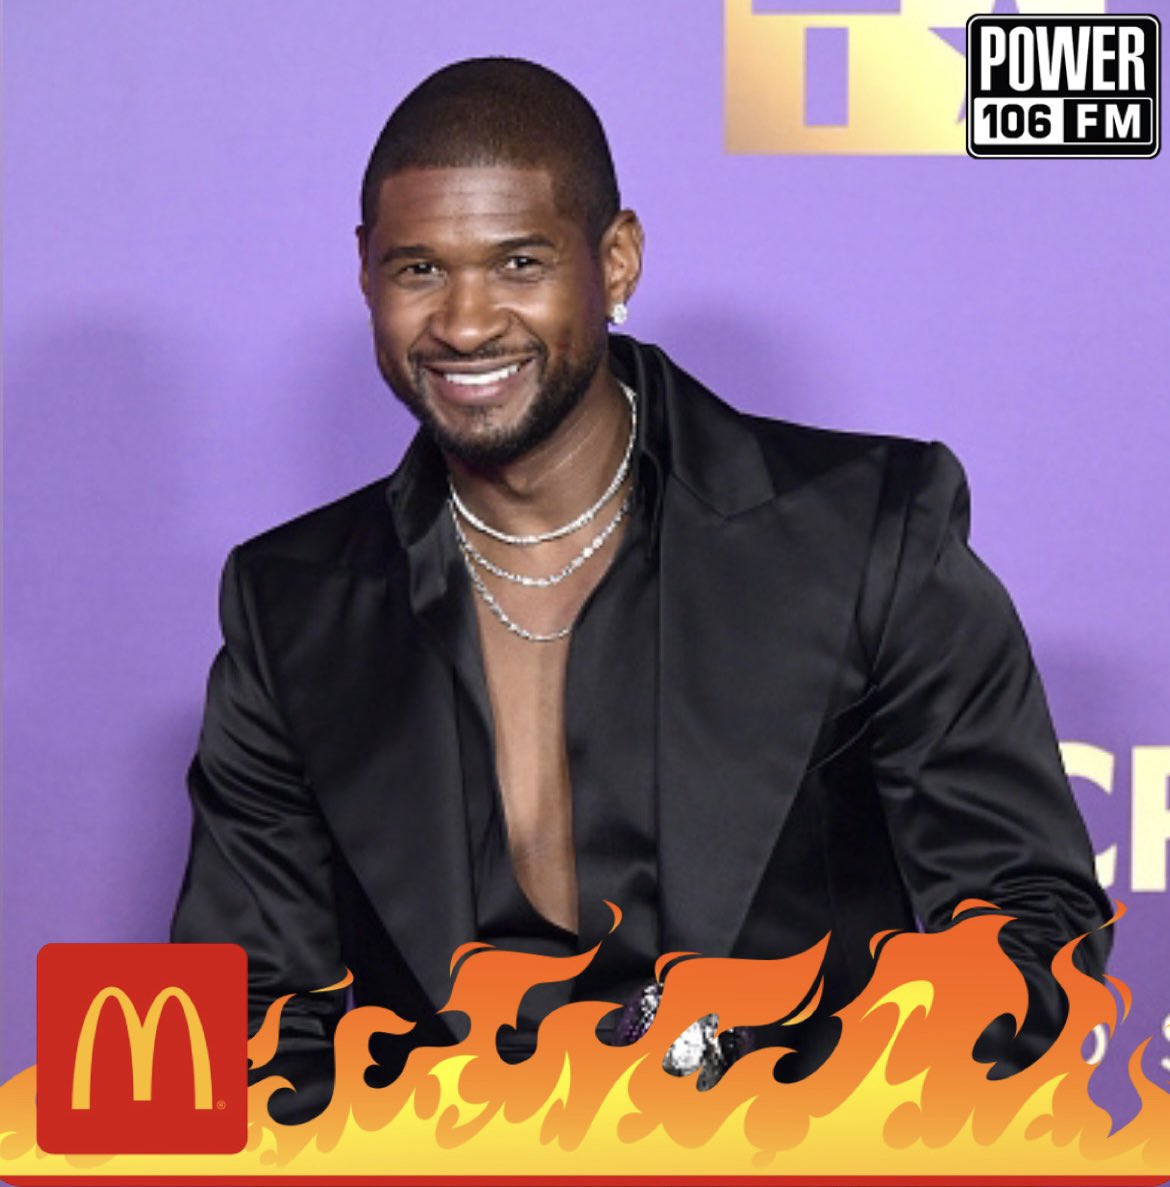 Hip Hop is all about bringing the heat! Power 106 and McDonald’s salute the hottest in Hip Hop for their contributions. Today we salute #Usher! McDonald’s is also turning up the heat with their Spicy McNuggets with aged cayenne and chili pepper, it’s a must try!